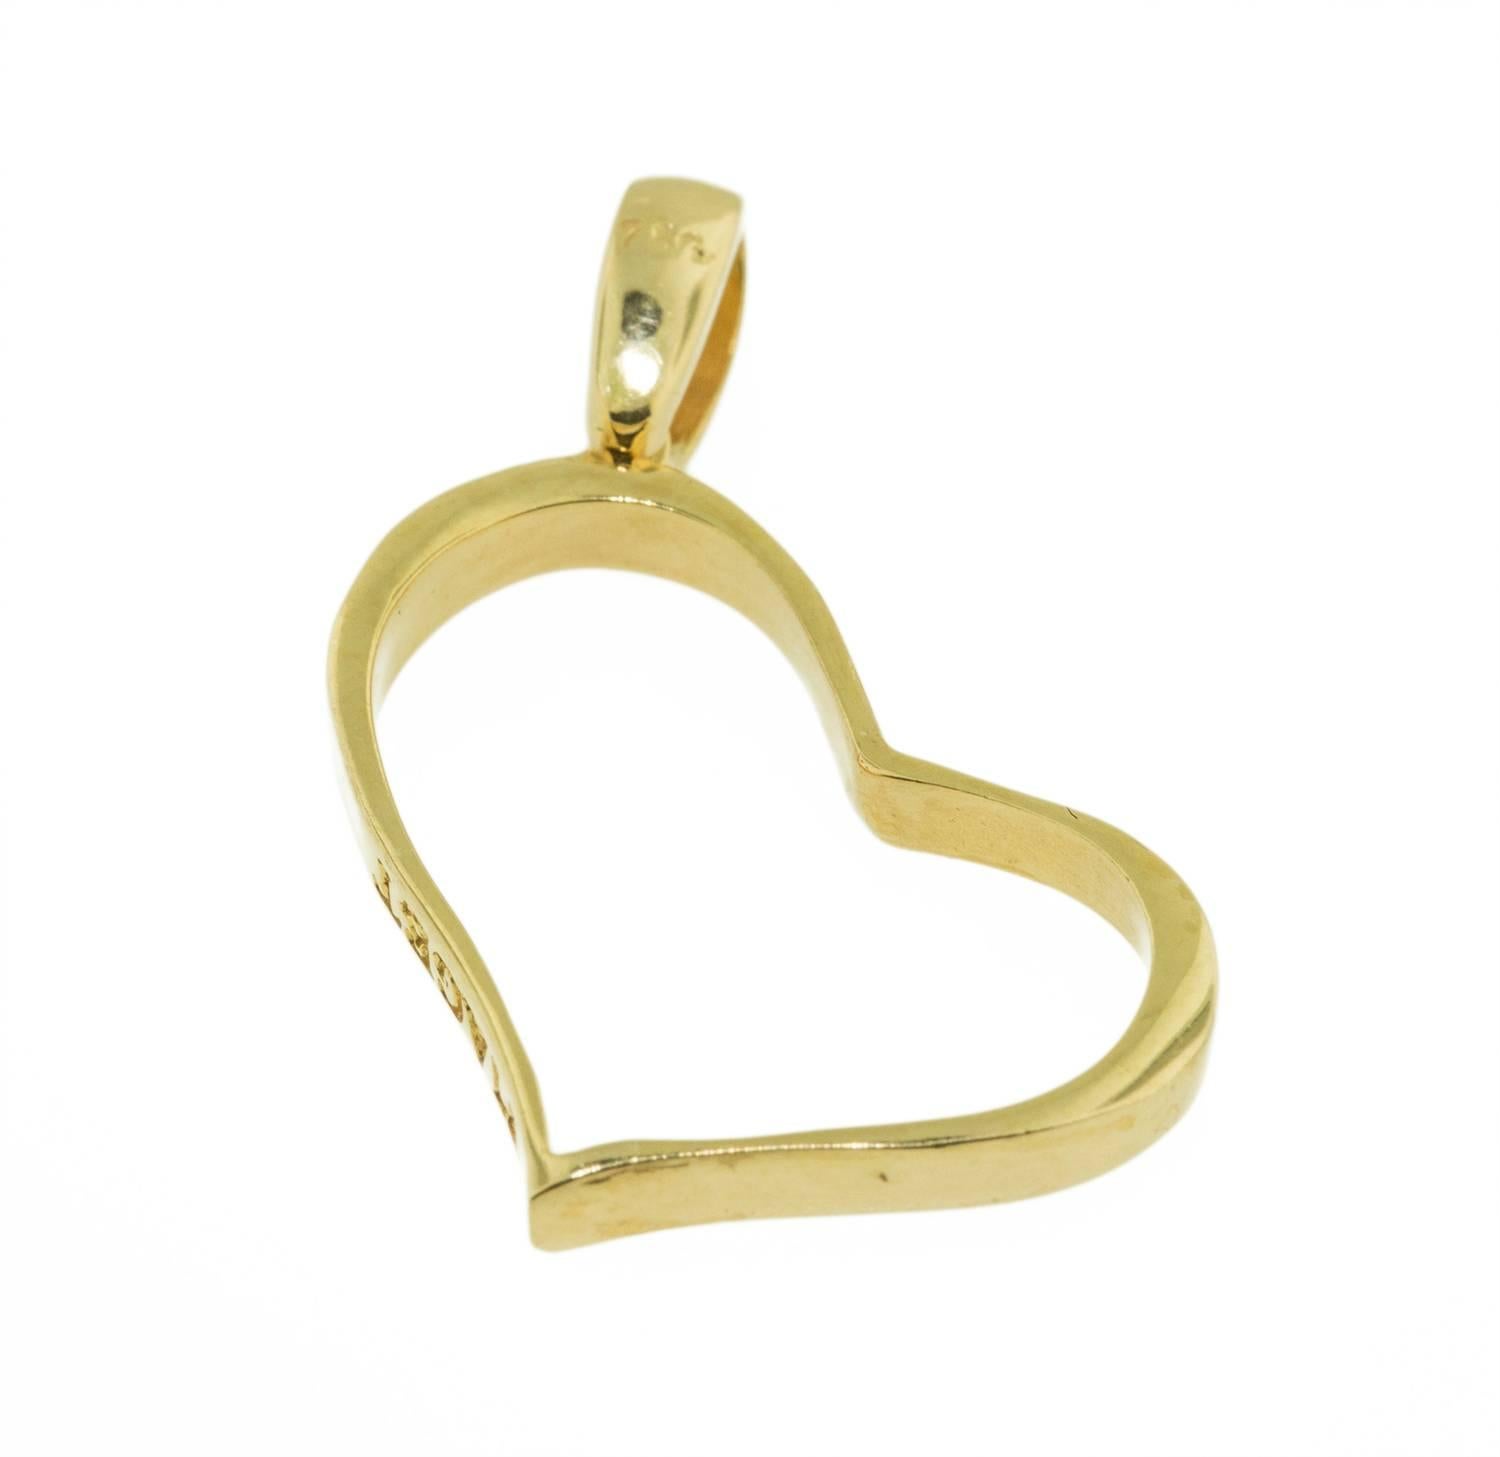 This charming stylized heart is clearly stamped Piaget and 750. It was made in France approximately twenty five years ago. This piece is in excellent condition.